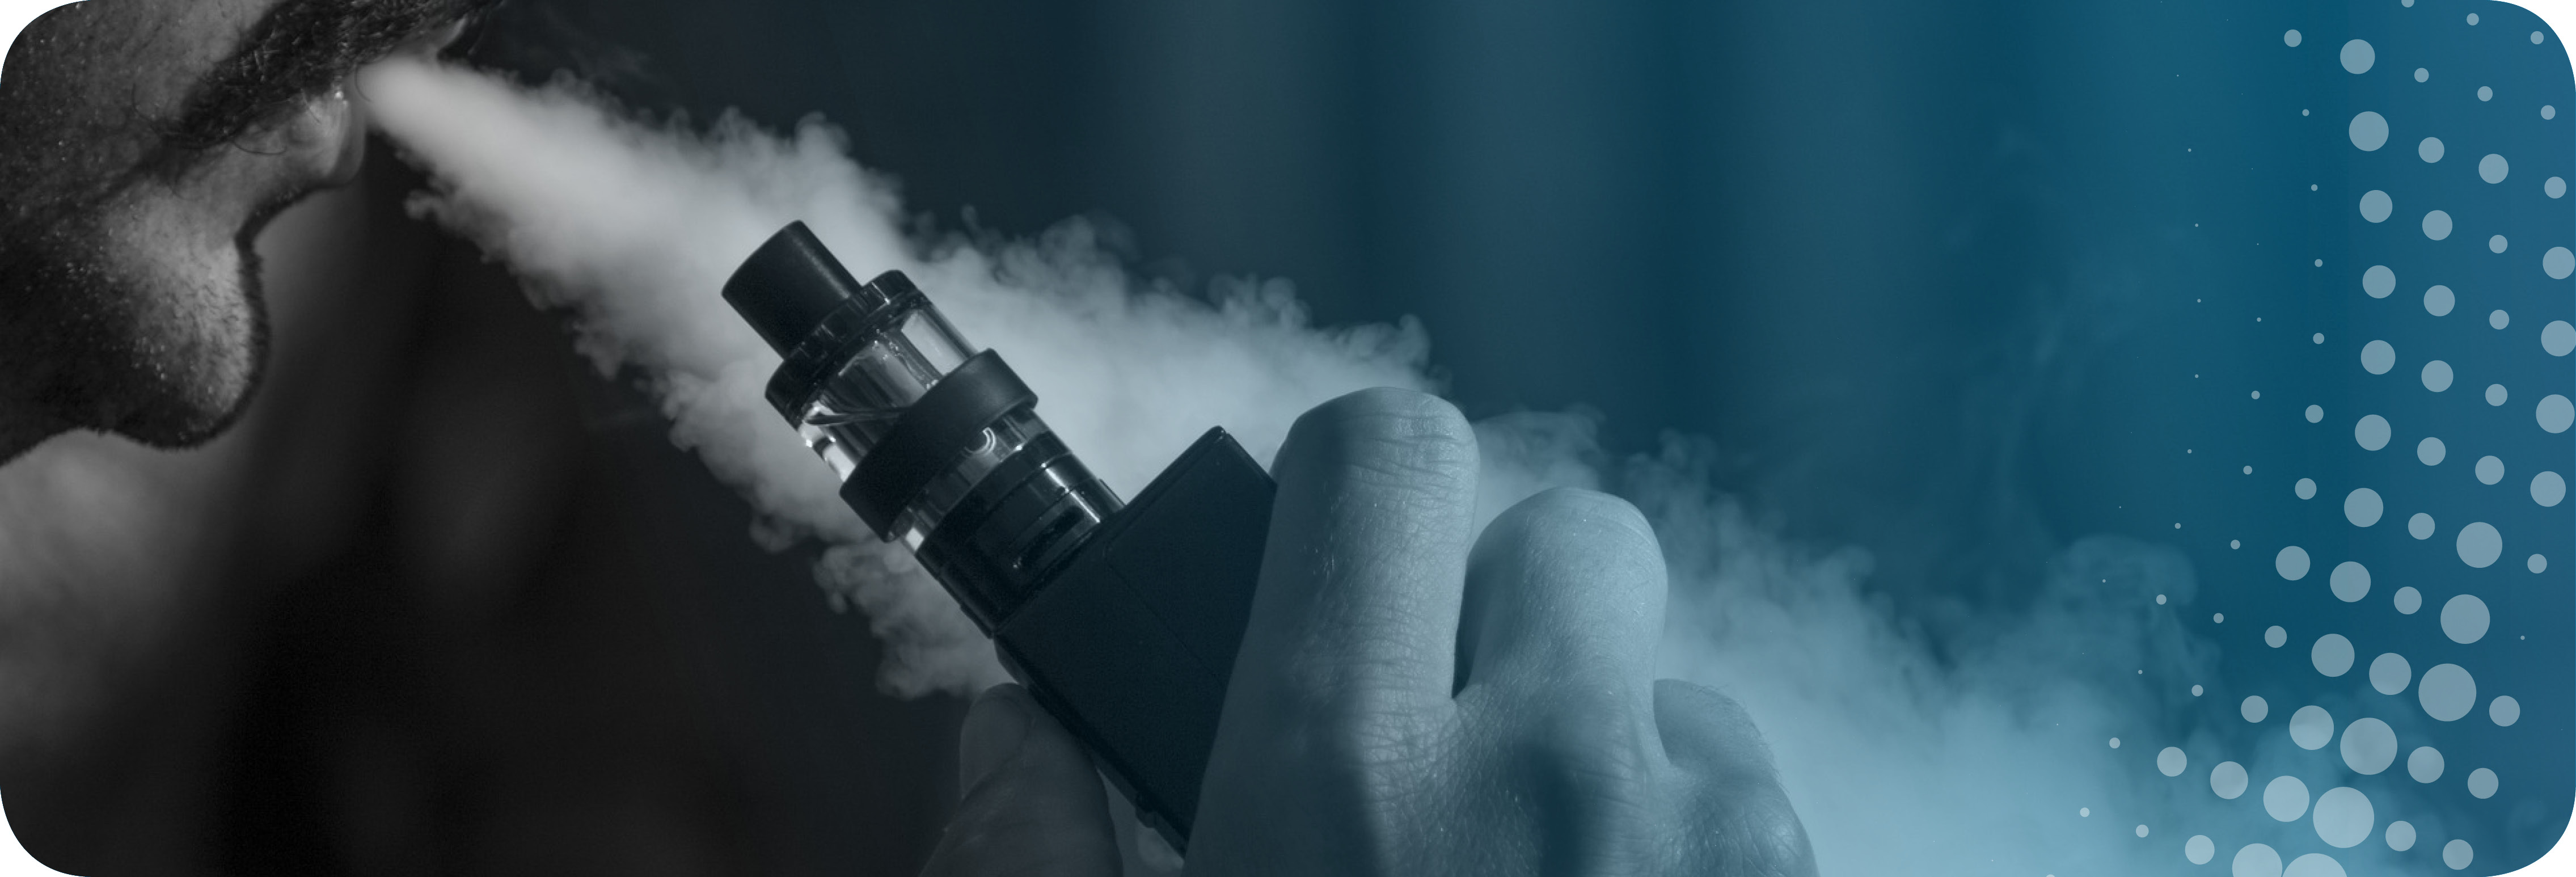 Vaping suspected for health consequences, needs regulation